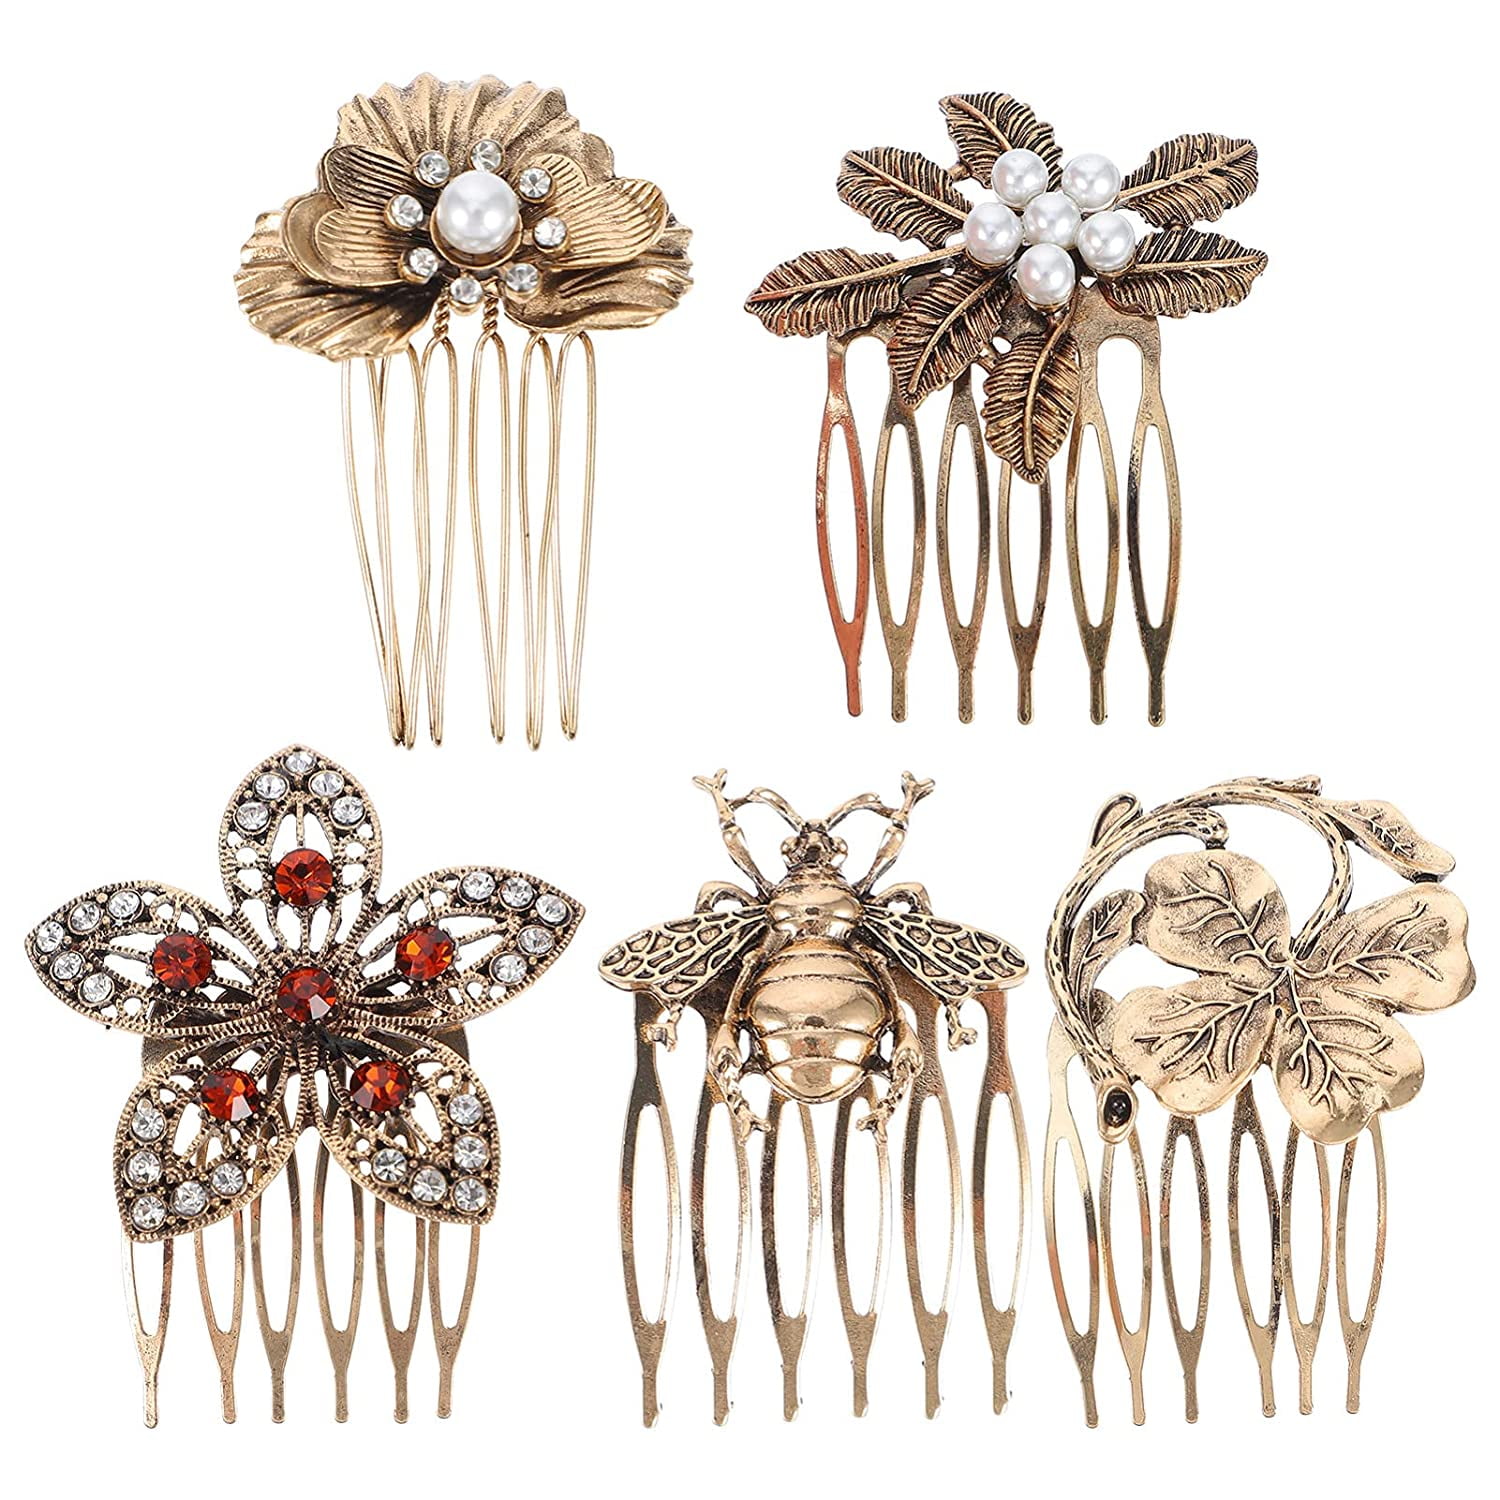 Nail Your Next Party With This Hair Pin Hairstyle - Lulus.com Fashion Blog